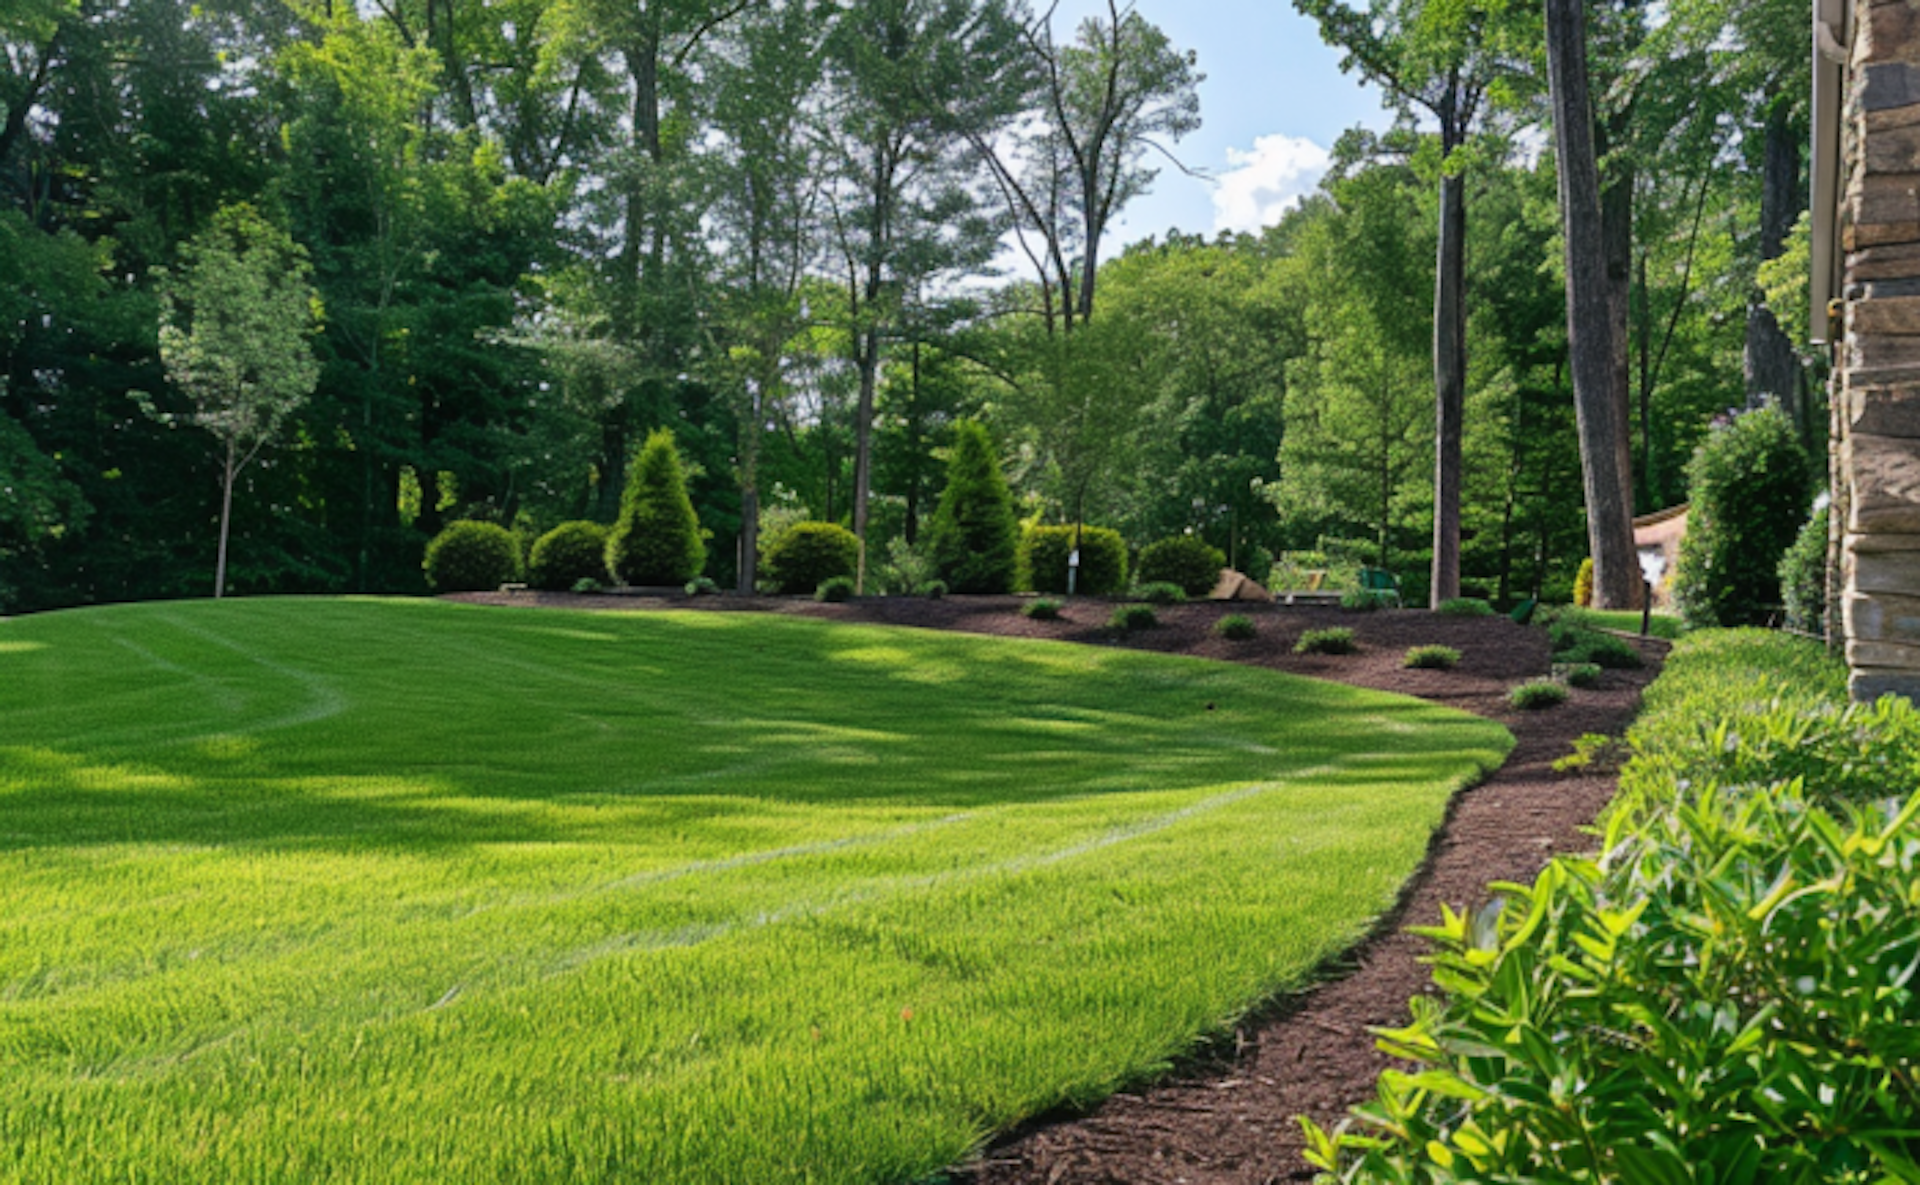 An effective way to prevent ticks in your yard is to keep up with your landscaping and lawn maintenance.